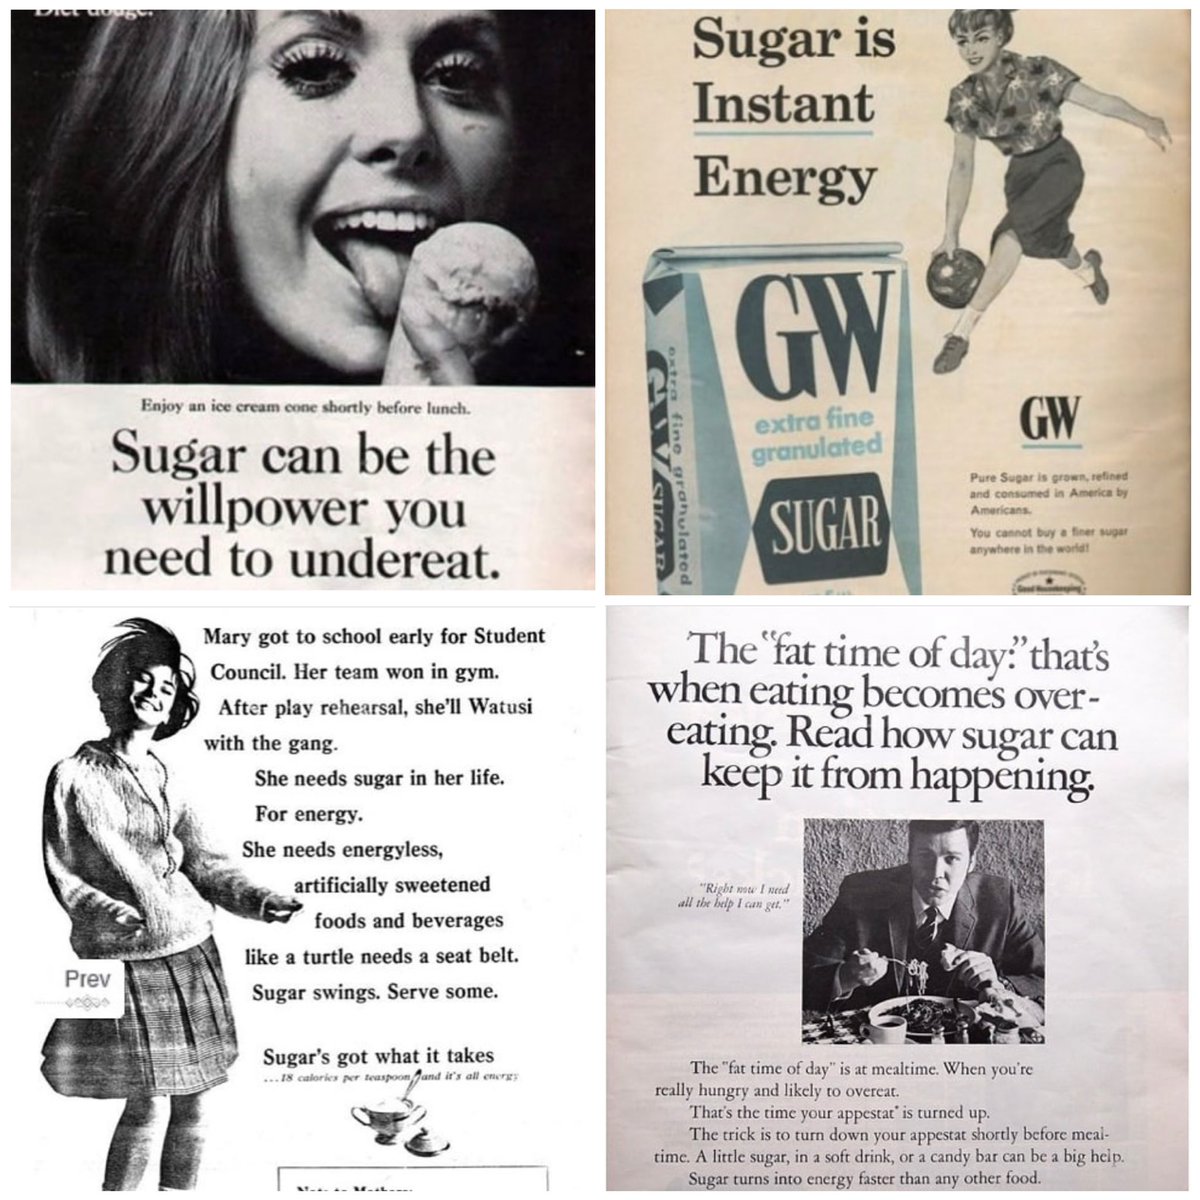 20th century advising accuracy for using sugar for energy, weight management supporting oxidative metabolism vs today's anti-sugar closed minded ignorance towards physiology and stress 

The roll of sugar is simple. Too normalise blood sugar levels, increase metabolism by